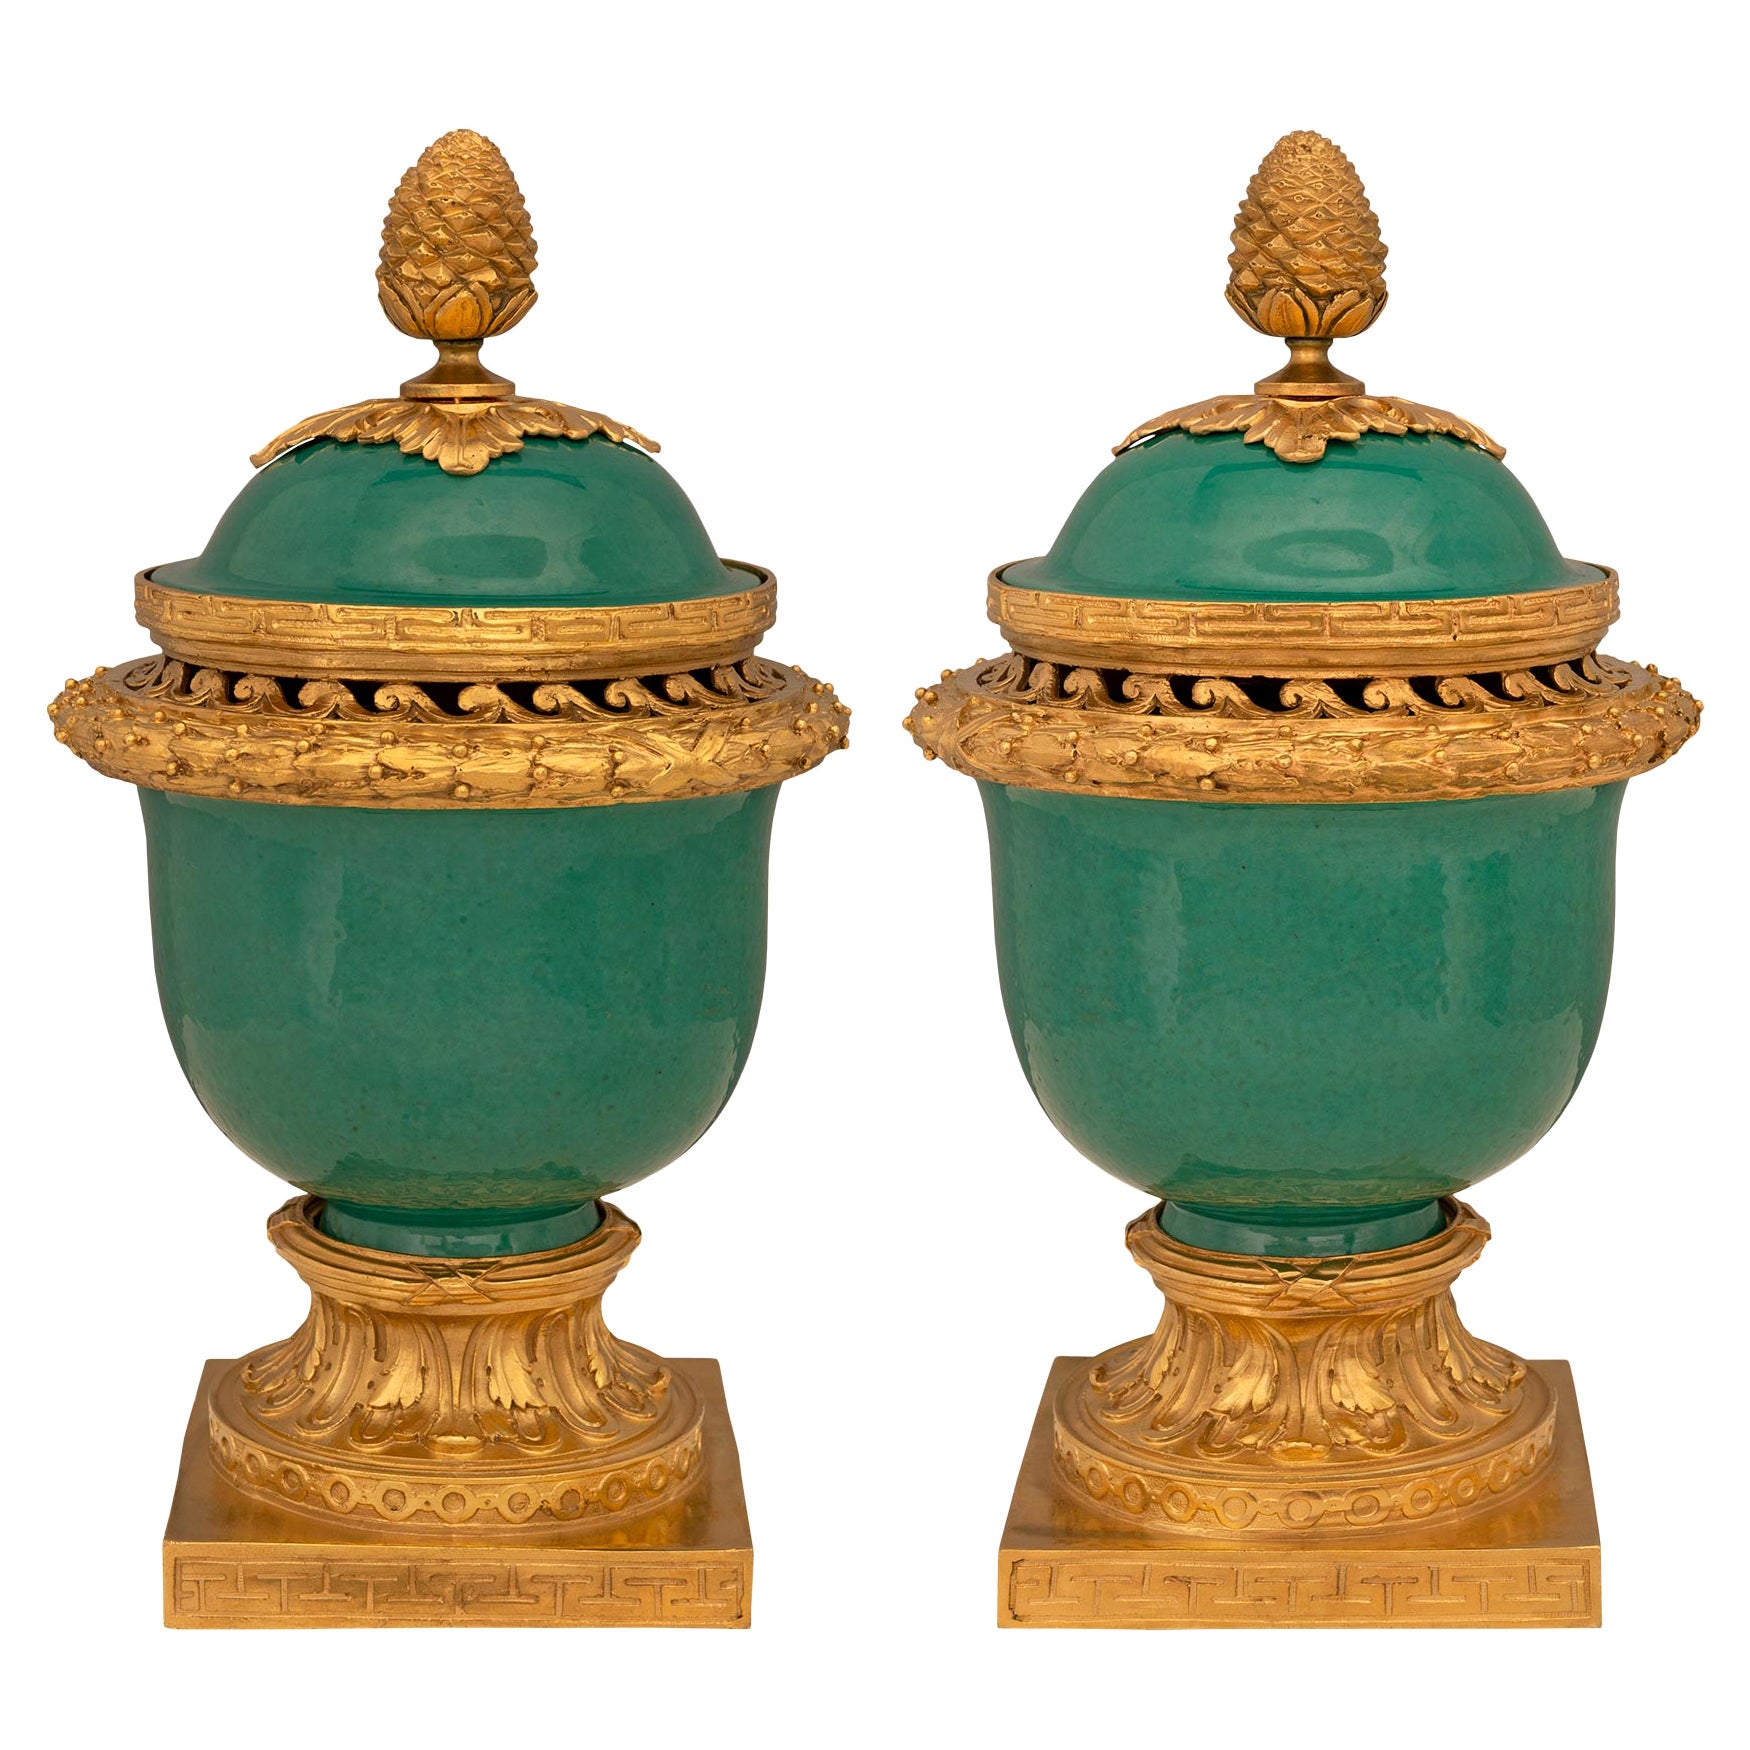 Pair of French 19th Century Louis XVI St. Porcelain and Ormolu Lidded Urns For Sale